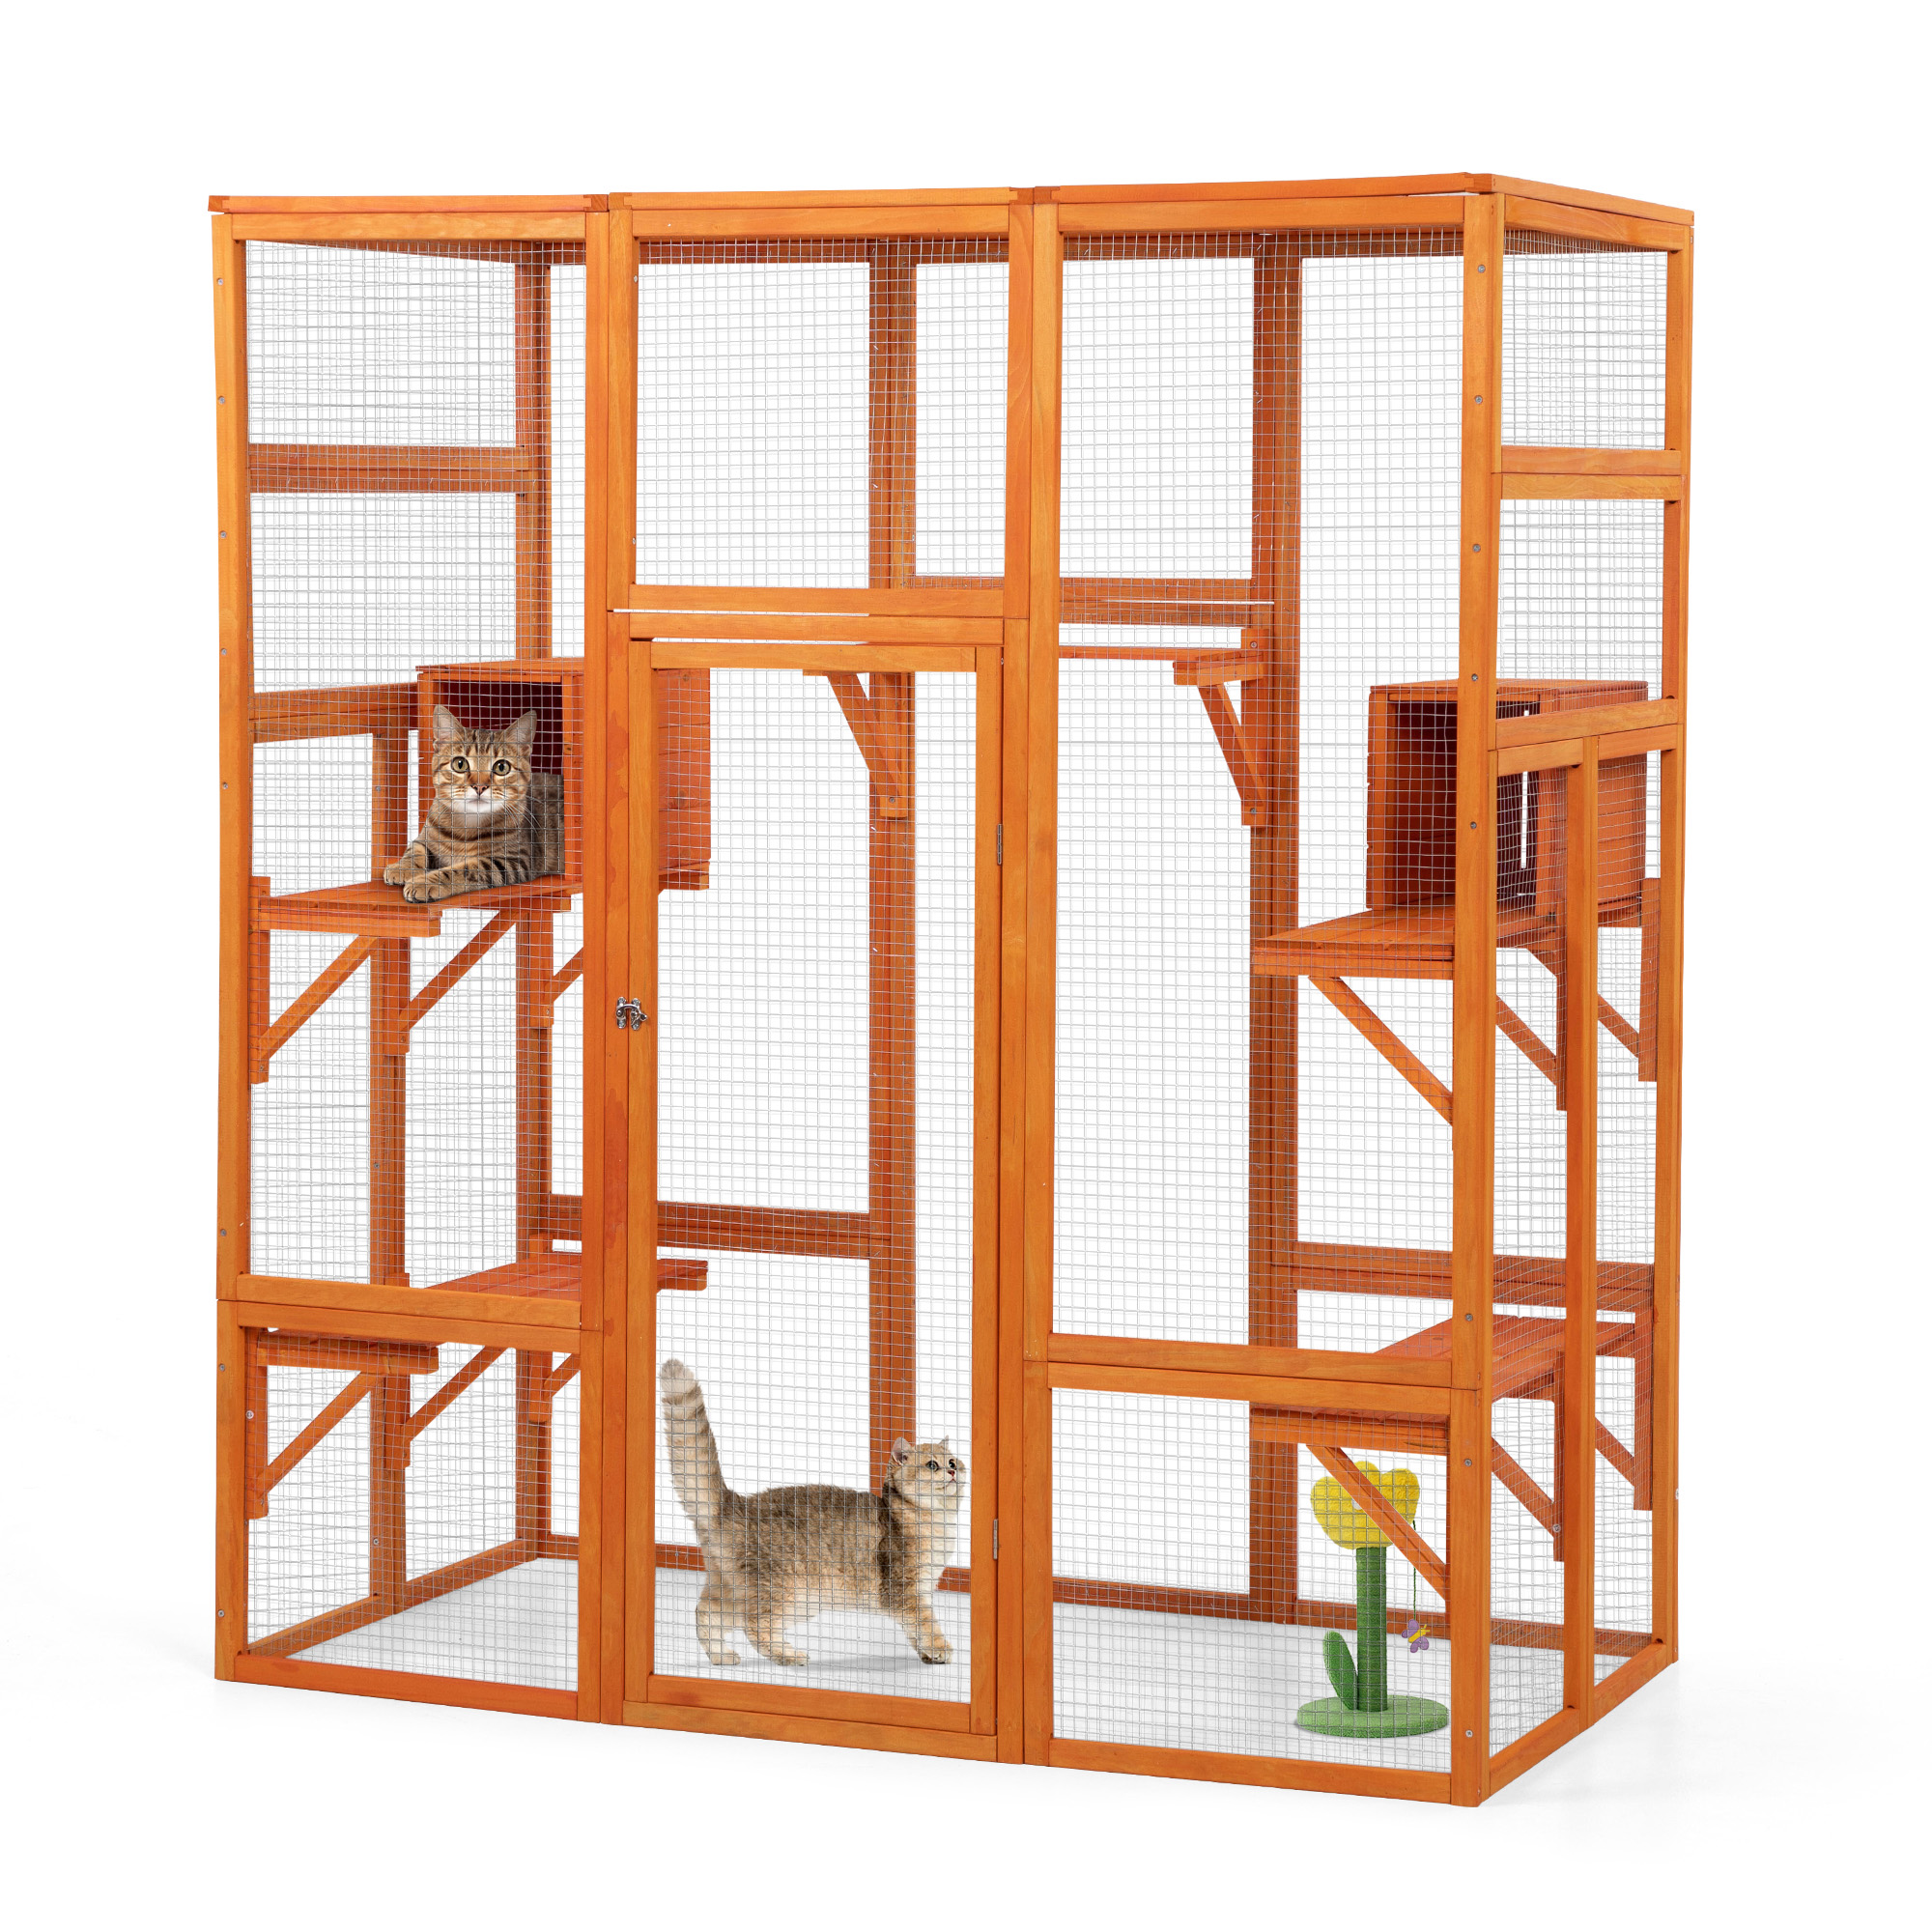 

71inches Large Cat House Outdoor&indoor - Cat Play & Run Enclosures Indoor Kitty Window Cage With Waterproof Roof, 7 Platforms & 2 Resting Box, Uv Resistant Orange/grey